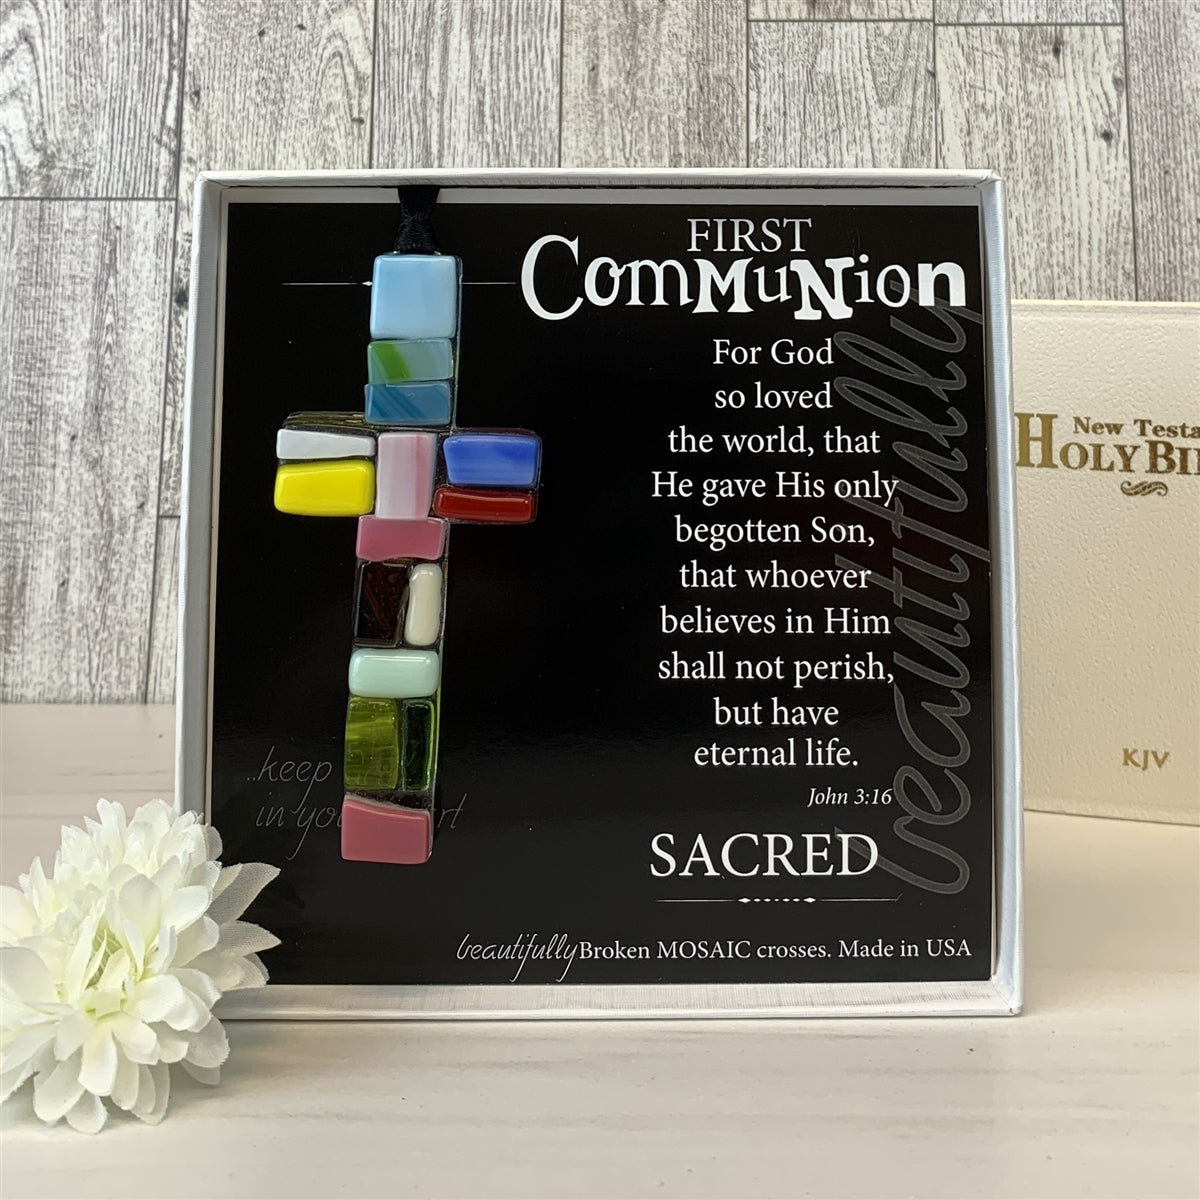 First Communion glass mosaic cross with bible in background.